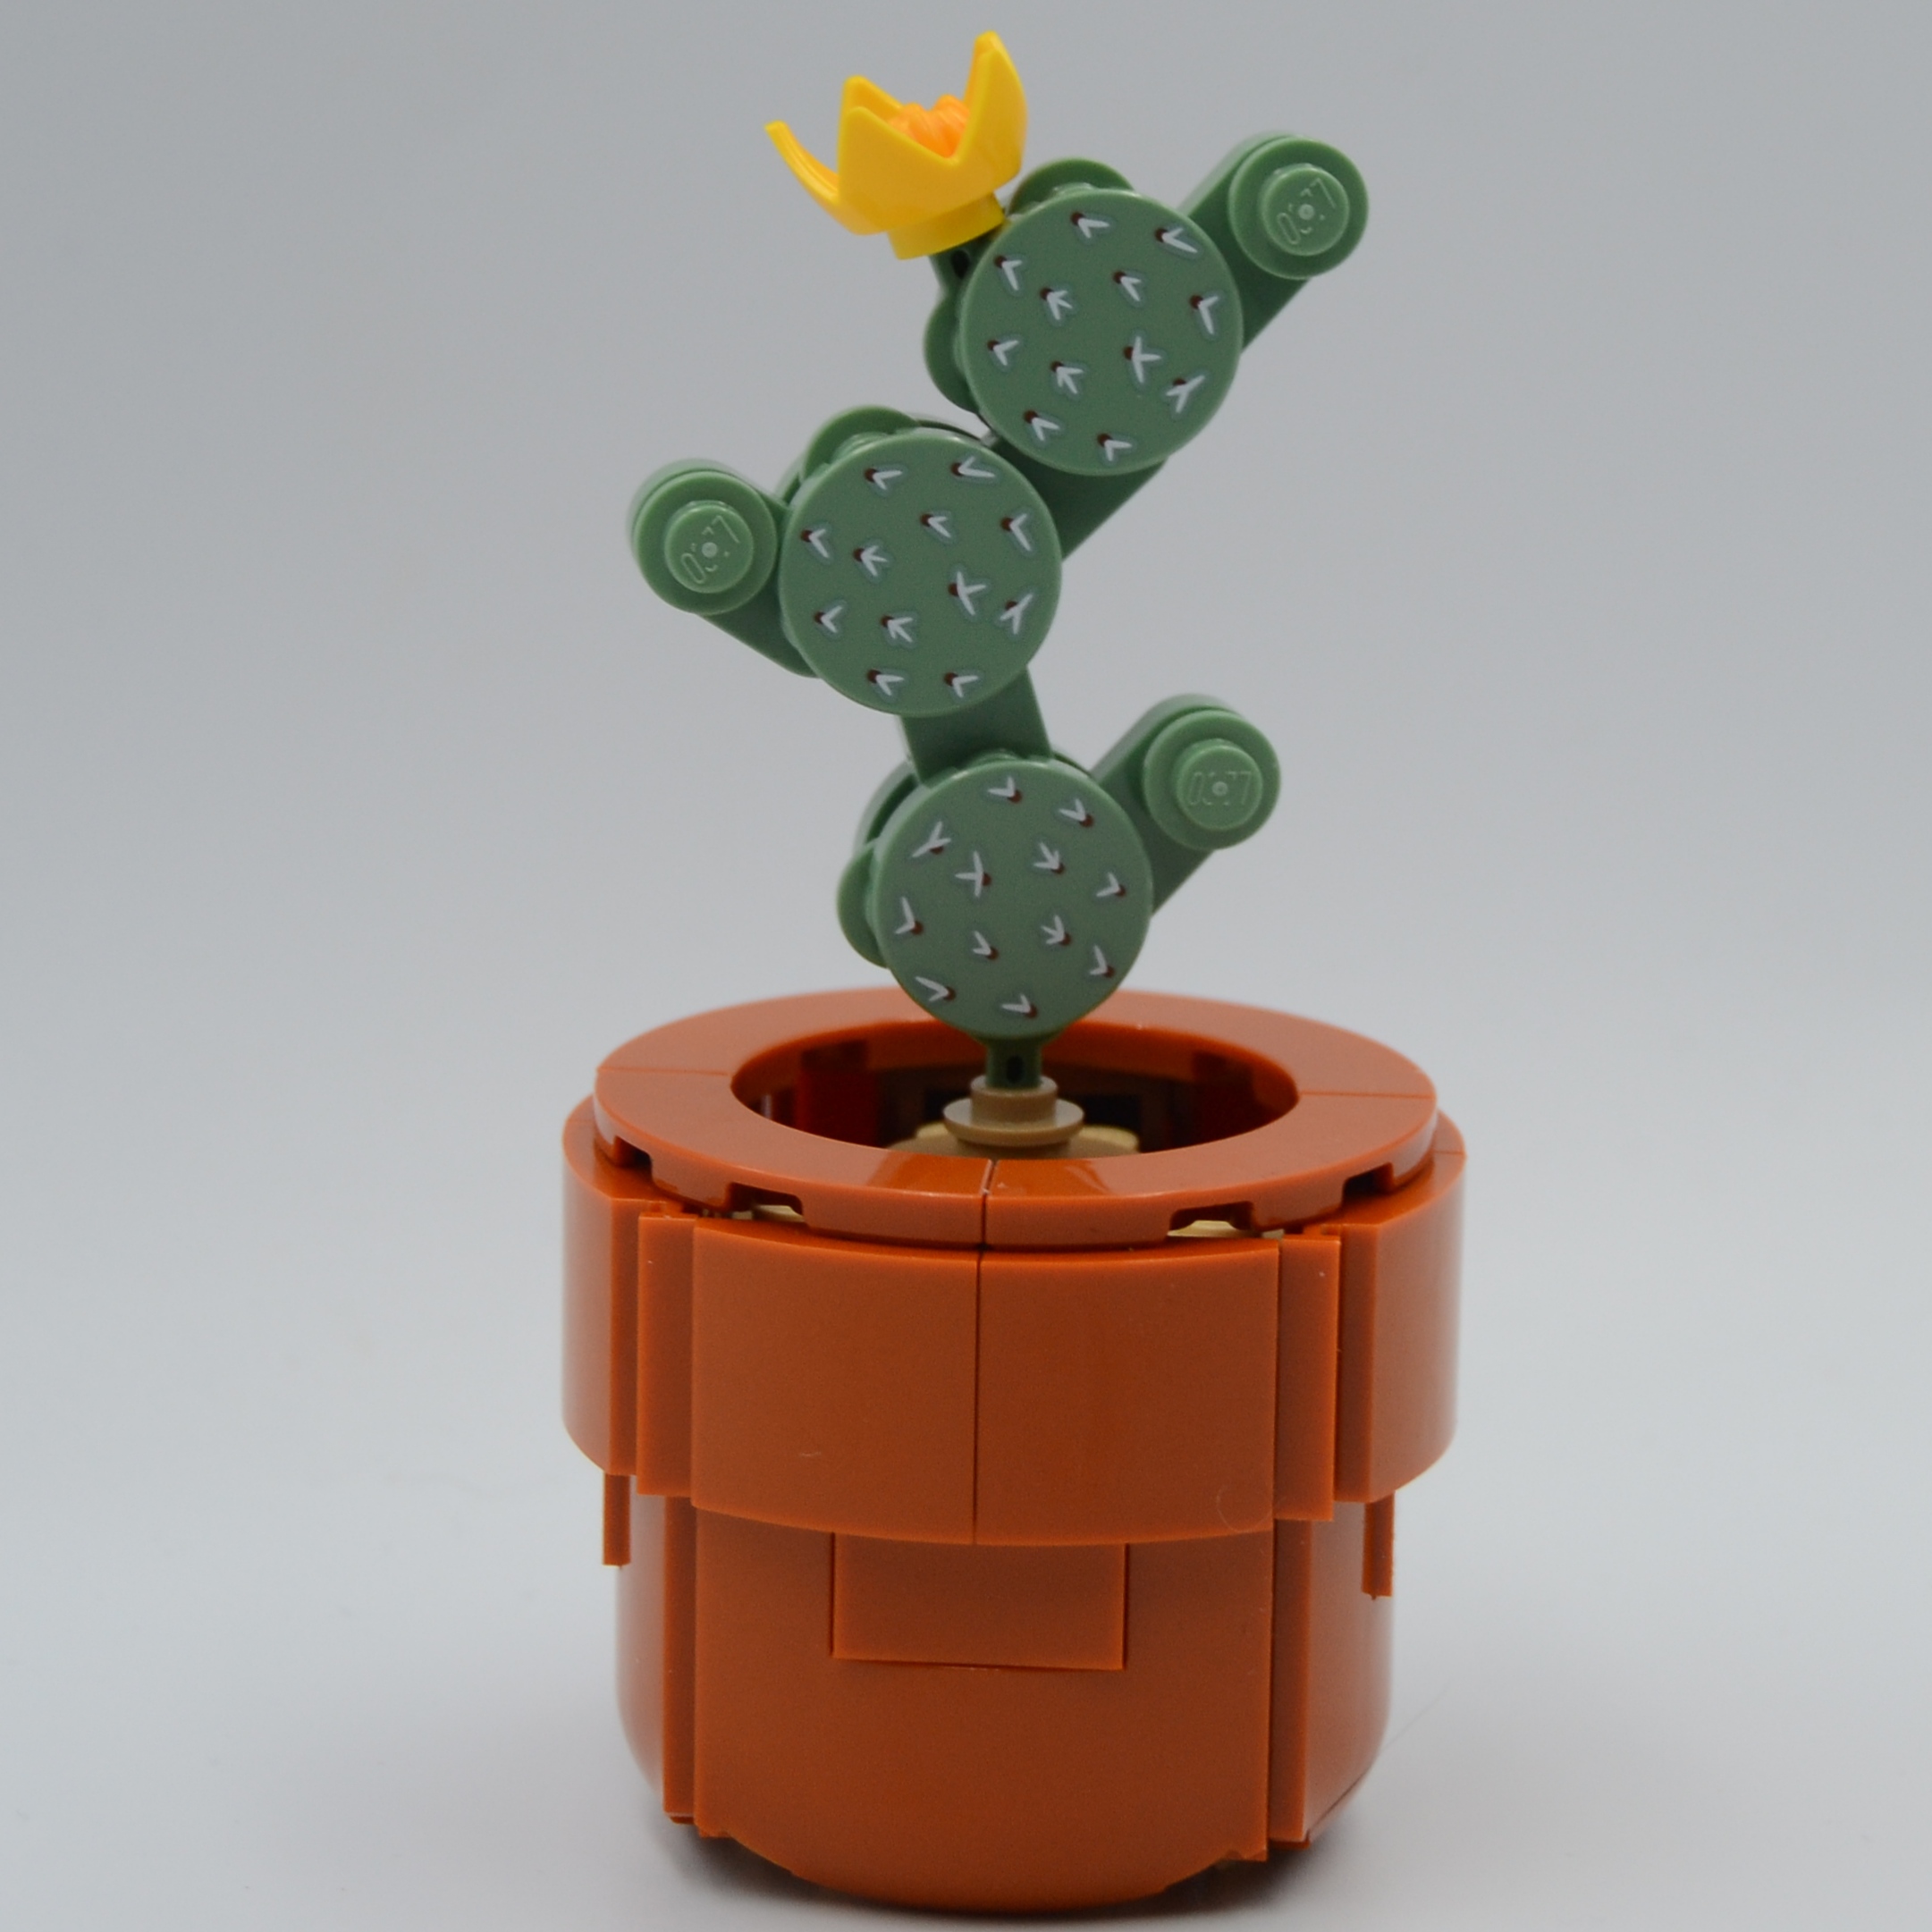 LEGO Botanical Collection Tiny Plants (10329) Review – The Brick Post!